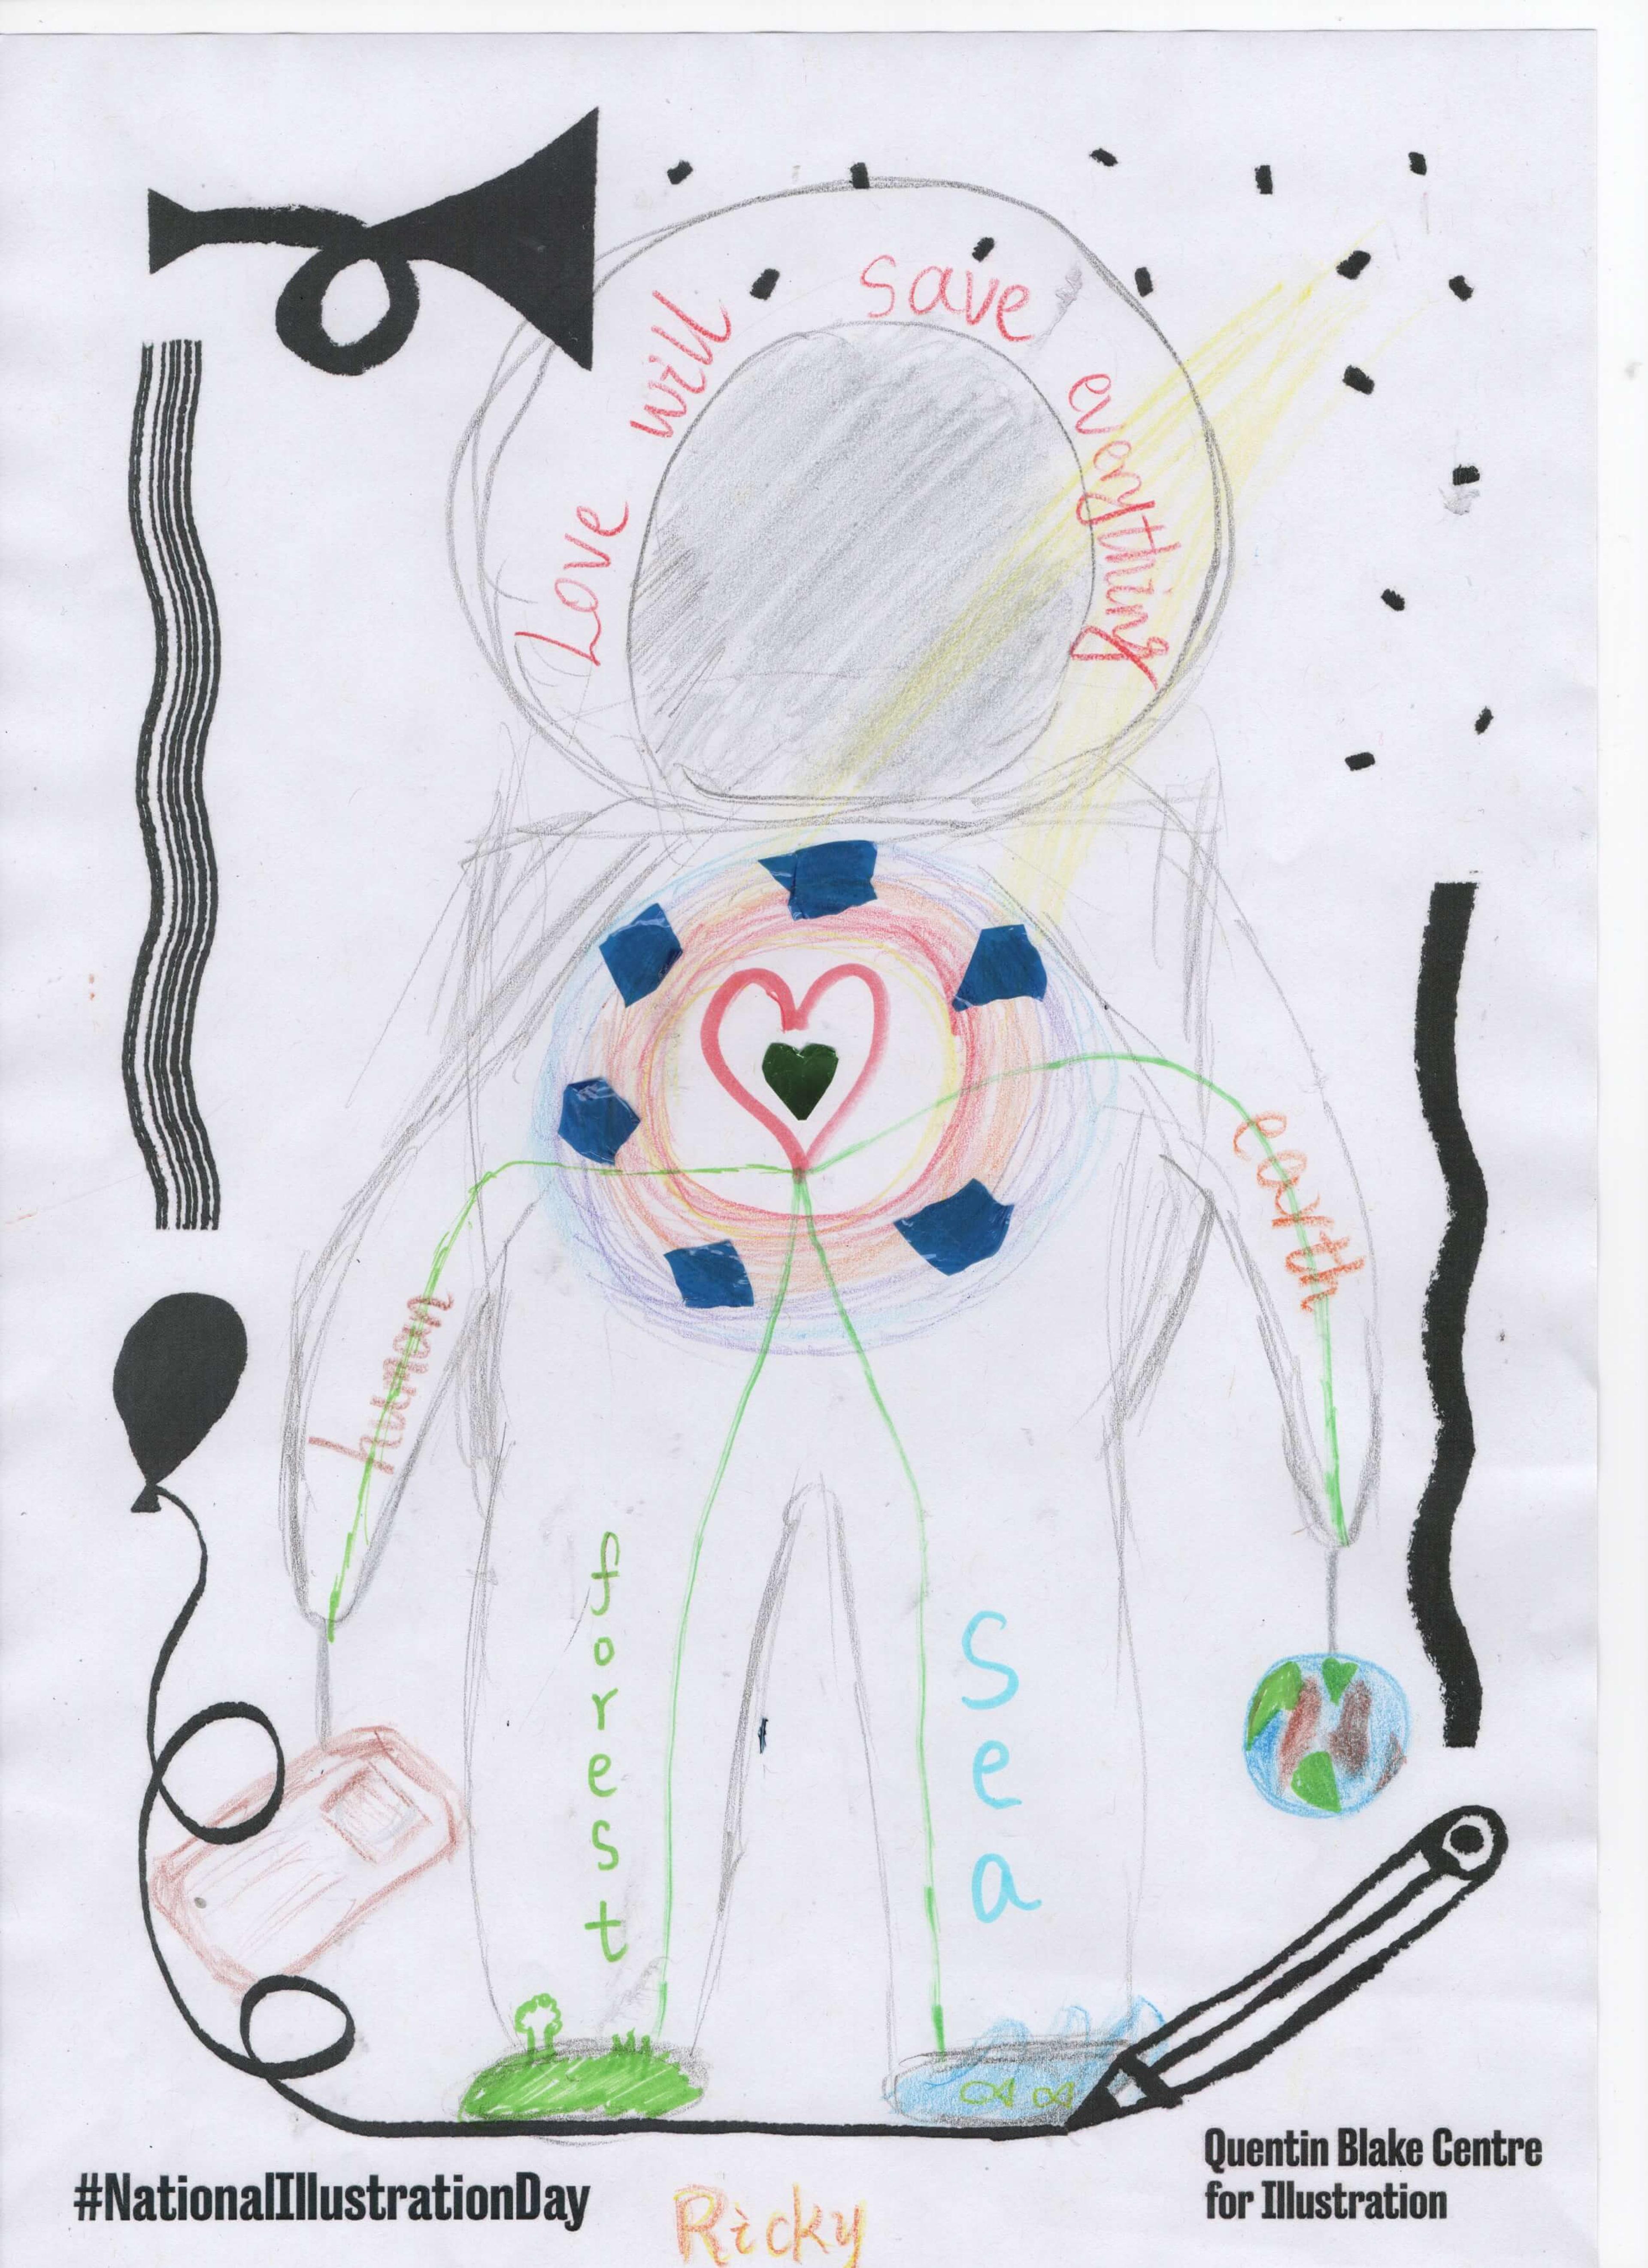 Silhouette of an astronaut with a big heart drawn on their chest. They are holding the earth suspended from a string in one hand and a phone in the other. The picture includes the words "love will save everything", "forest", "sea", "human" and "earth" written on the figure's head and limbs.